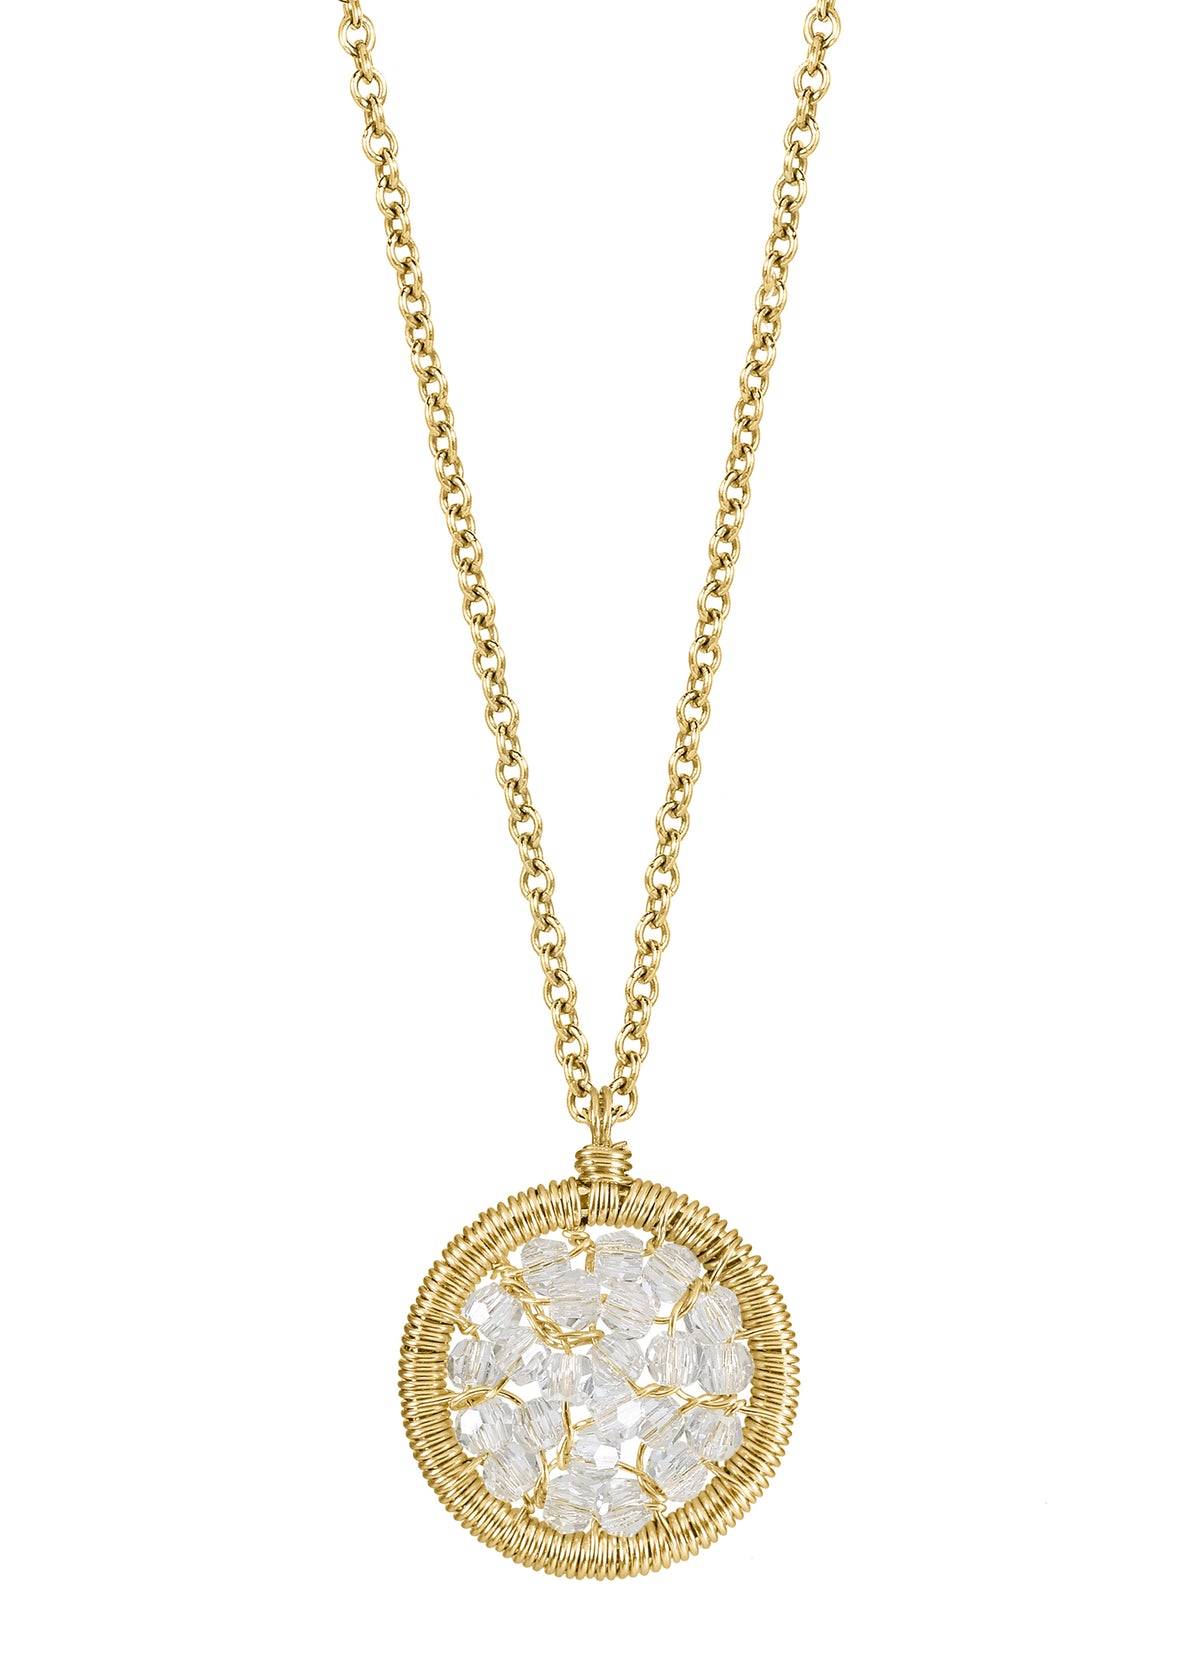 Crystal 14k gold fill Necklace measures 16&quot; in length Pendant measures 1/2&quot; in diameter Handmade in our Los Angeles studio